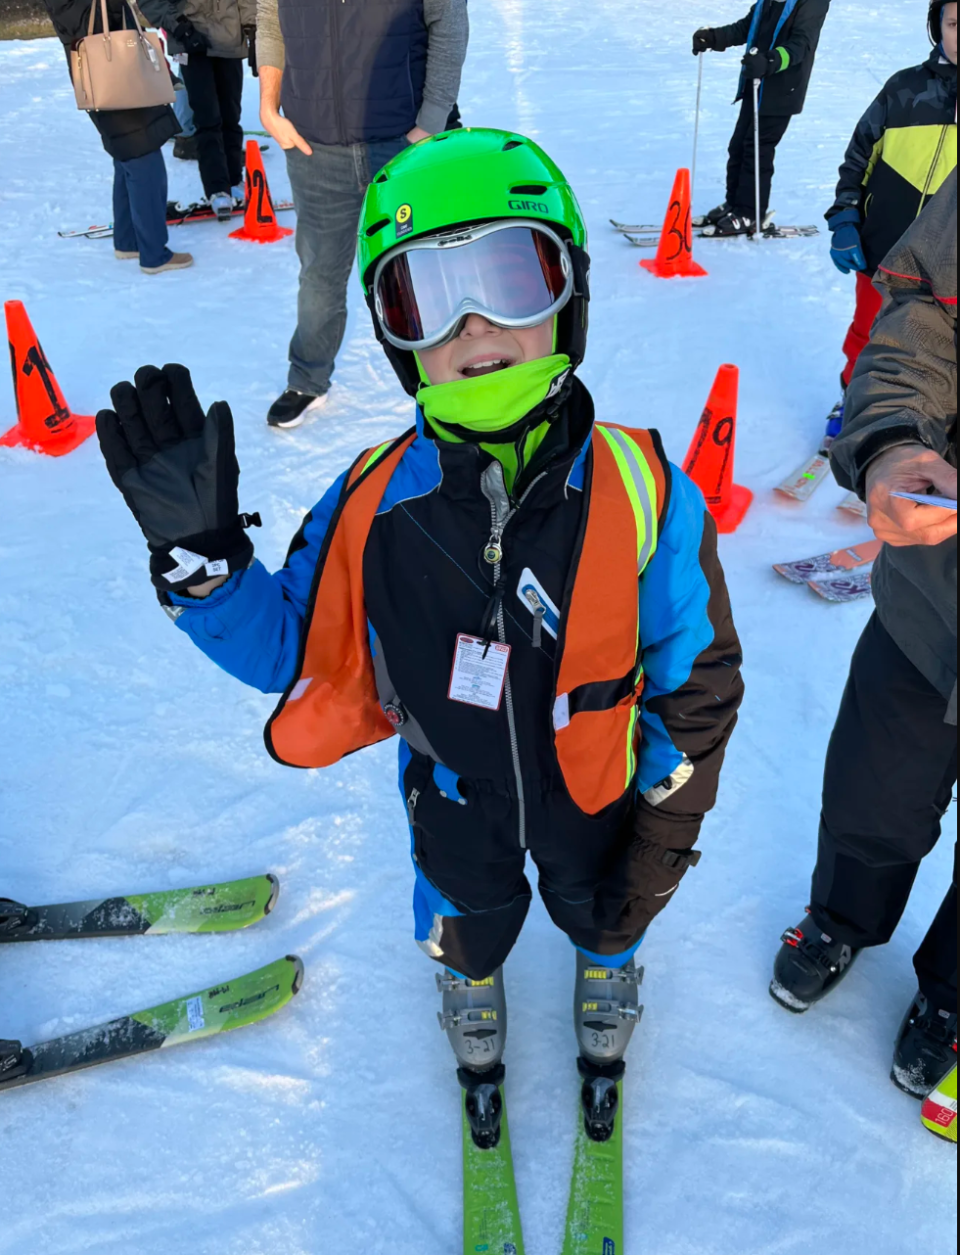 A student from Marston School skis alongside his peers during ski club.